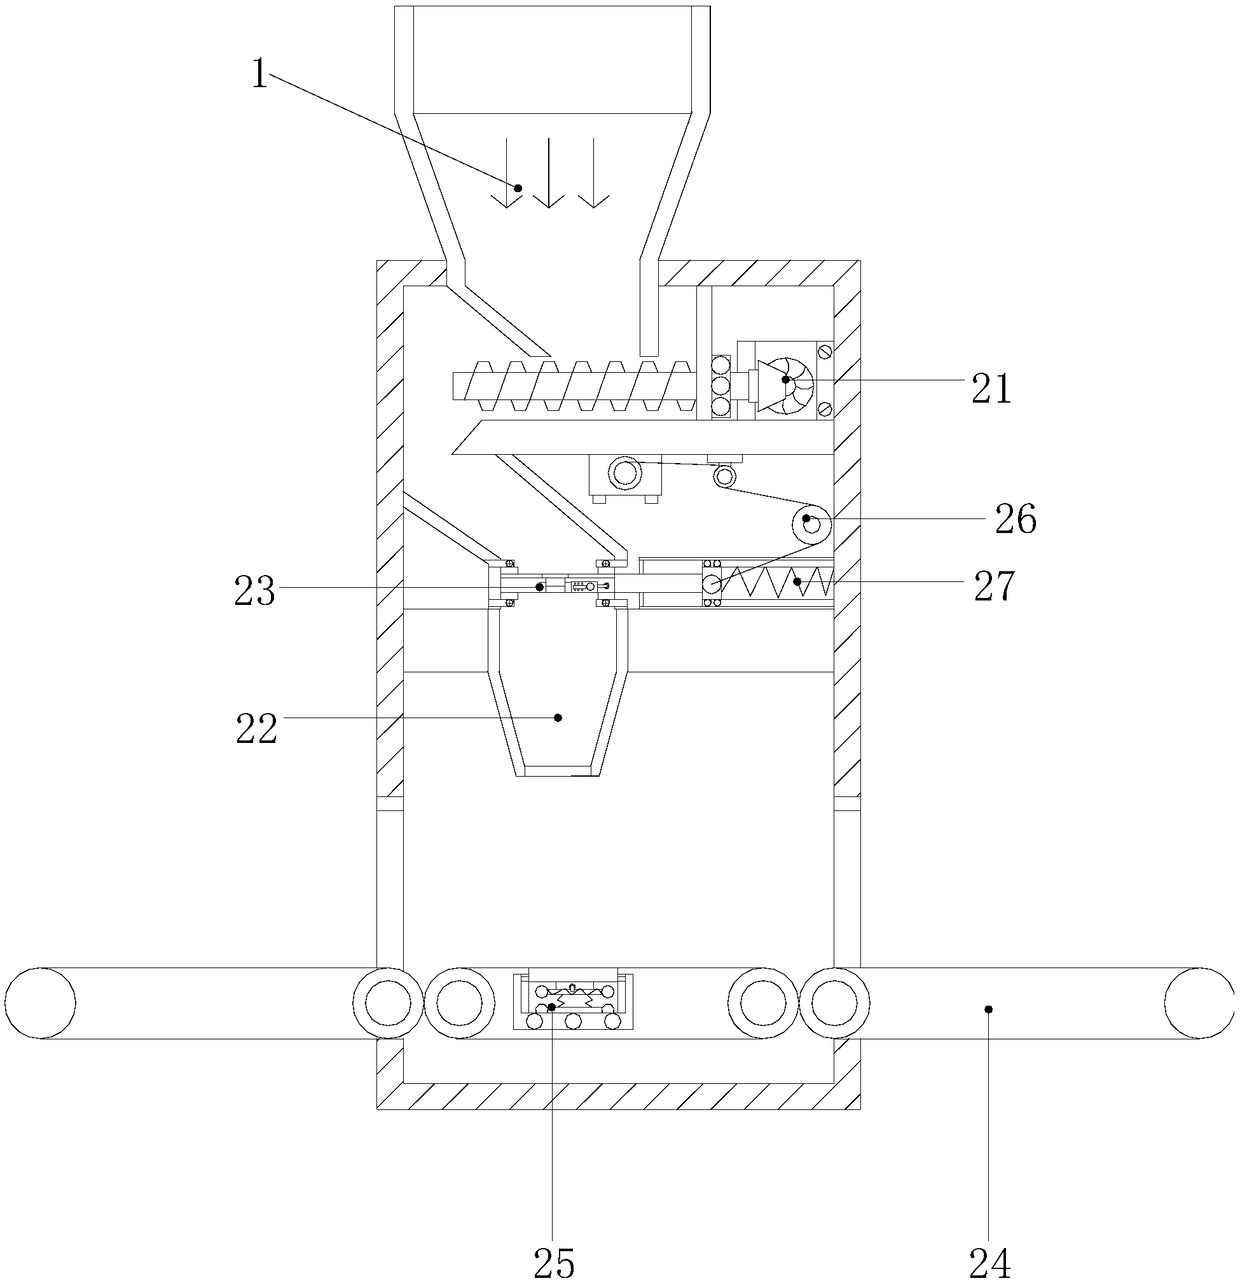 Automatic sub-packaging device for food packaging